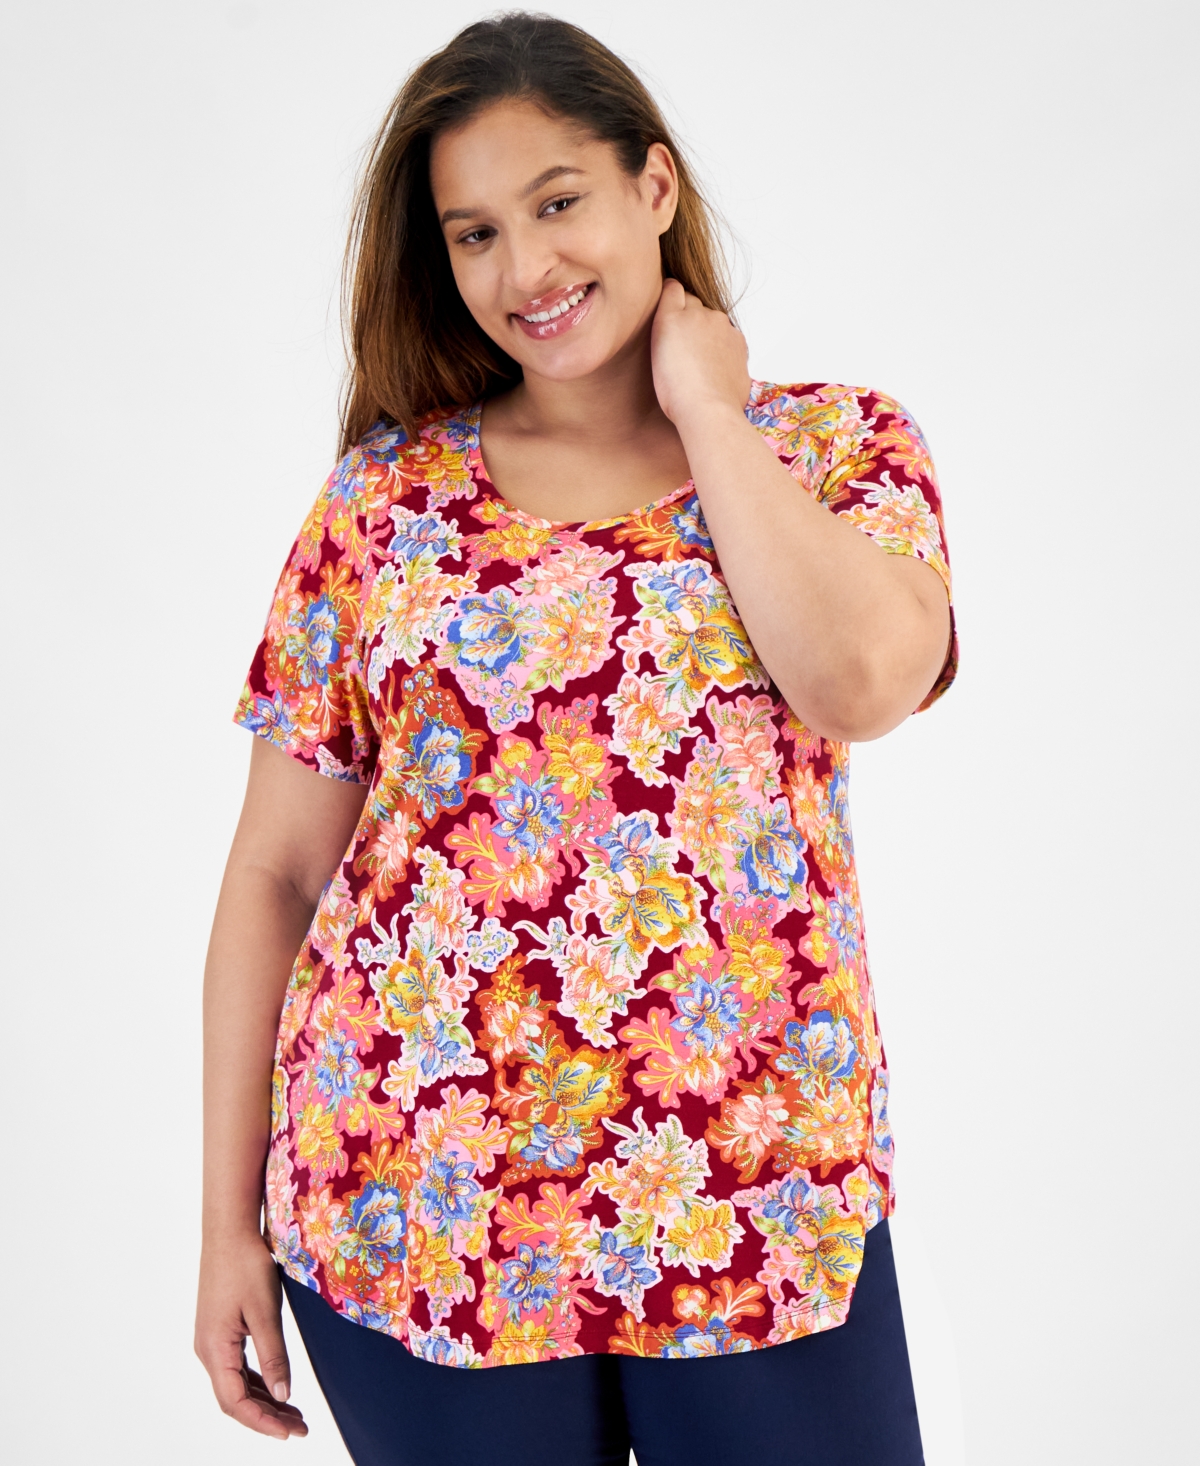 Plus Size Glorious Garden Scoop-Neck Top, Created for Macy's - Ruby Slipers Combo